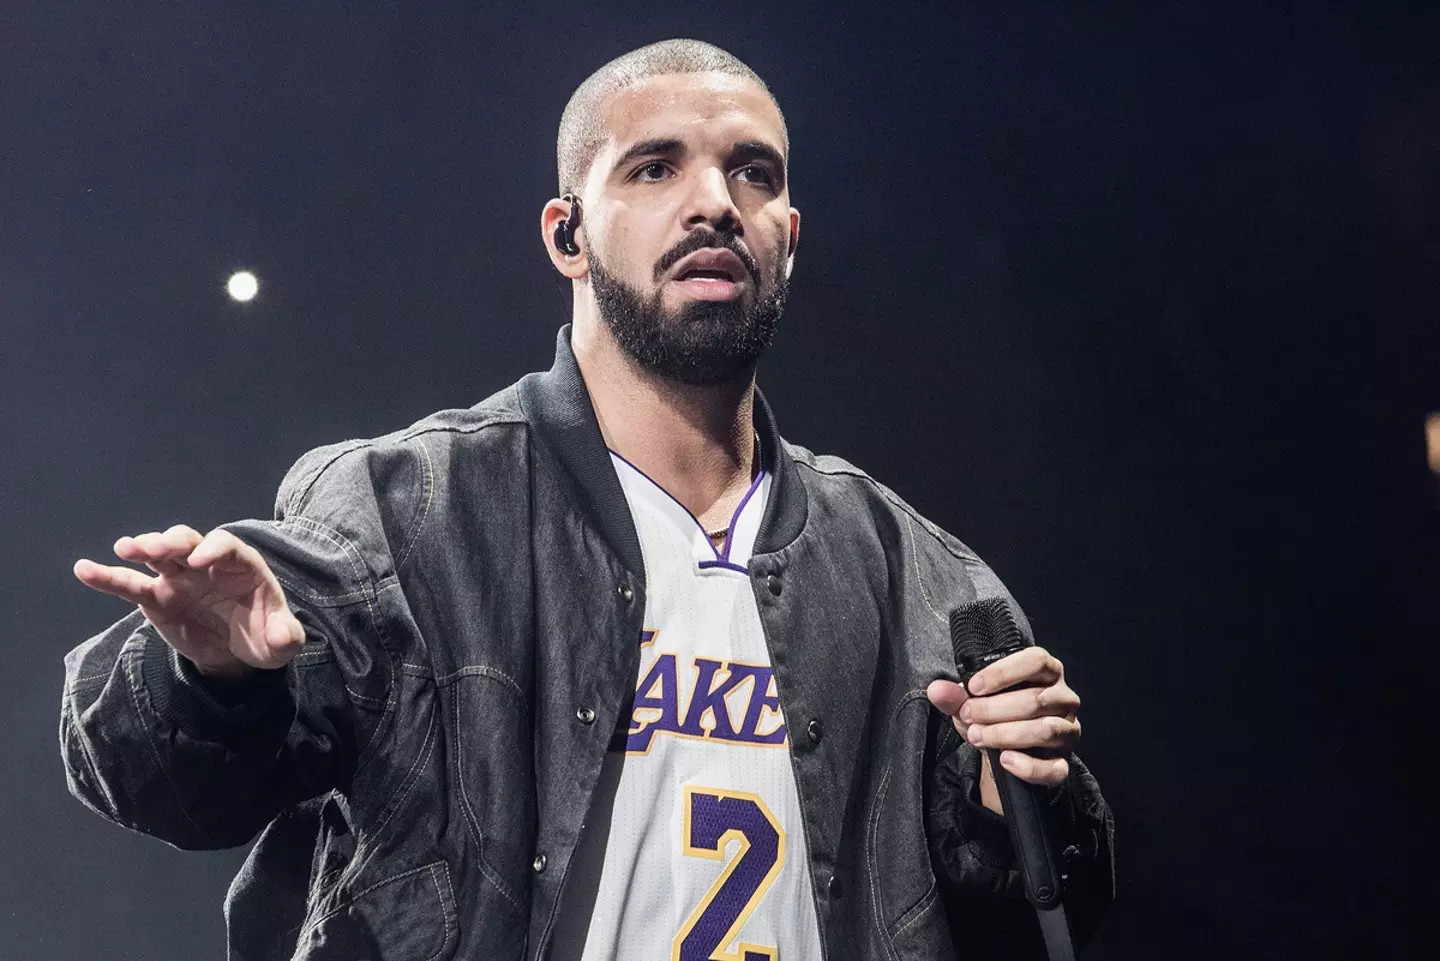 Drake has revealed himself as the new owner of Tupac's crown ring.